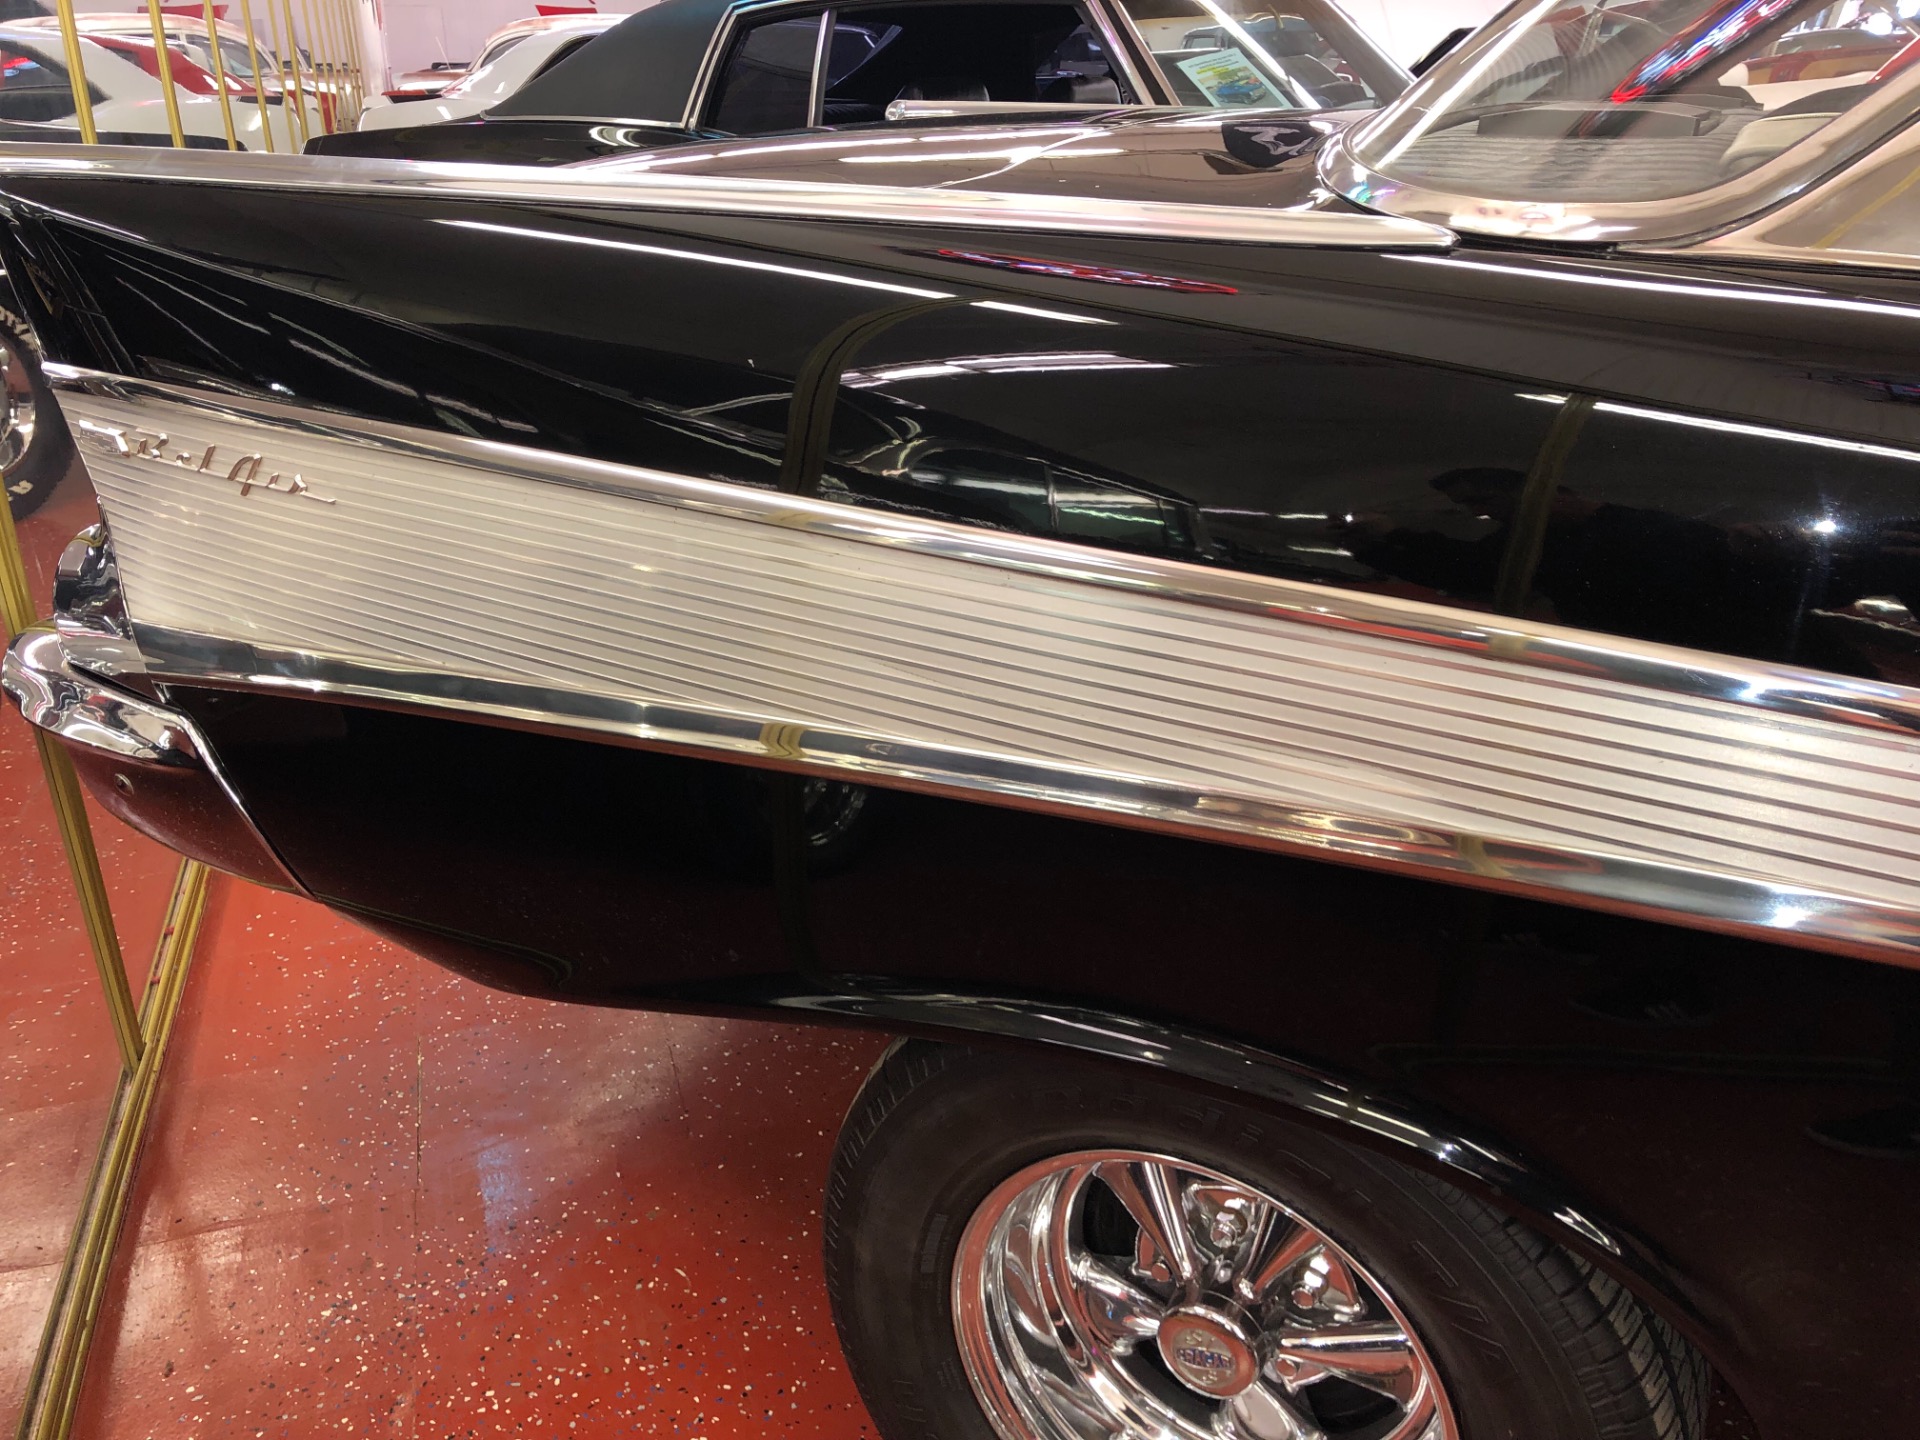 Used 1957 Chevrolet Bel Air -American Classic Hot Rod-Cragers-Same owner 35 years- | Mundelein, IL